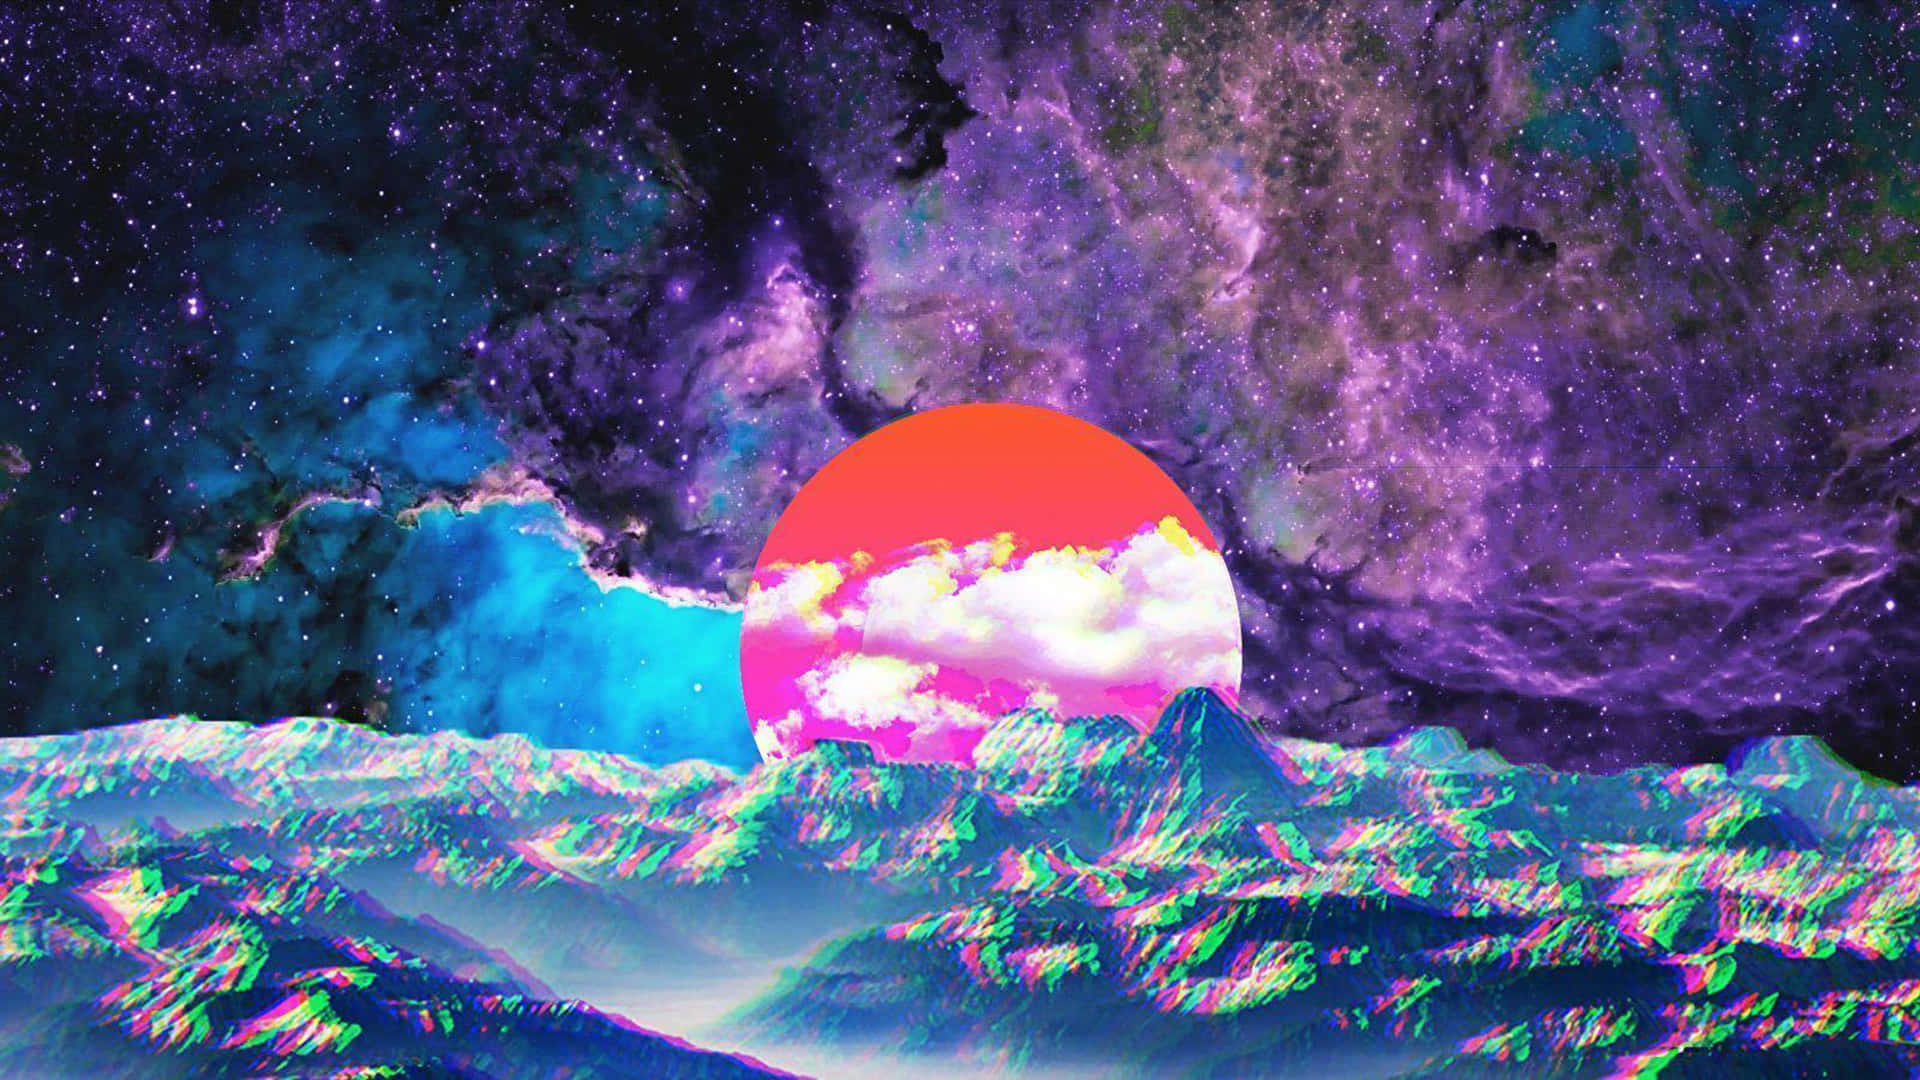 A Colorful Pixelated Image Of A Sun And Mountains Wallpaper